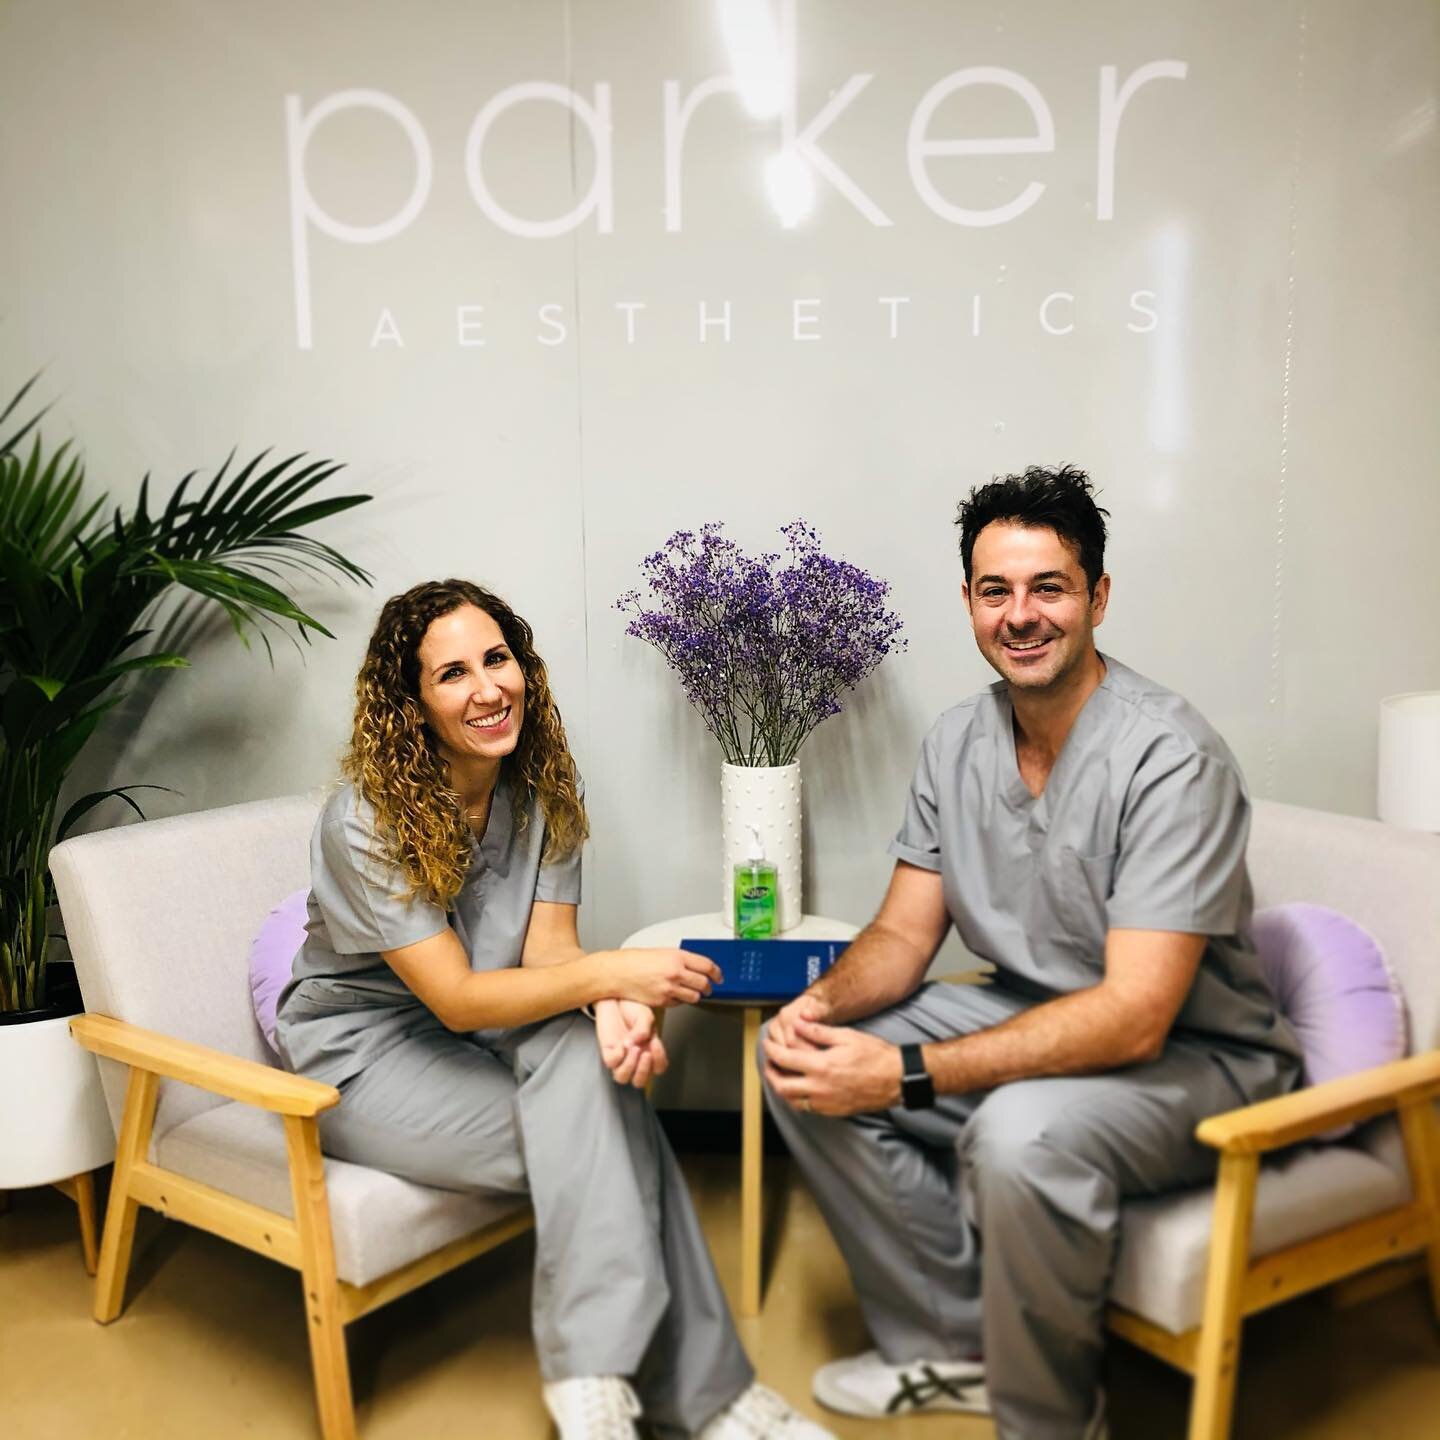 PARKER AESTHETICS:

Parker Aesthetics is a cosmetic medical practice now open in Carina Medical and Specialist Centre, Brisbane. 

Founded by husband and wife team, Dr Neil Parker and Dr Chiara Parker, the Parker Aesthetics clinics combine exceptiona